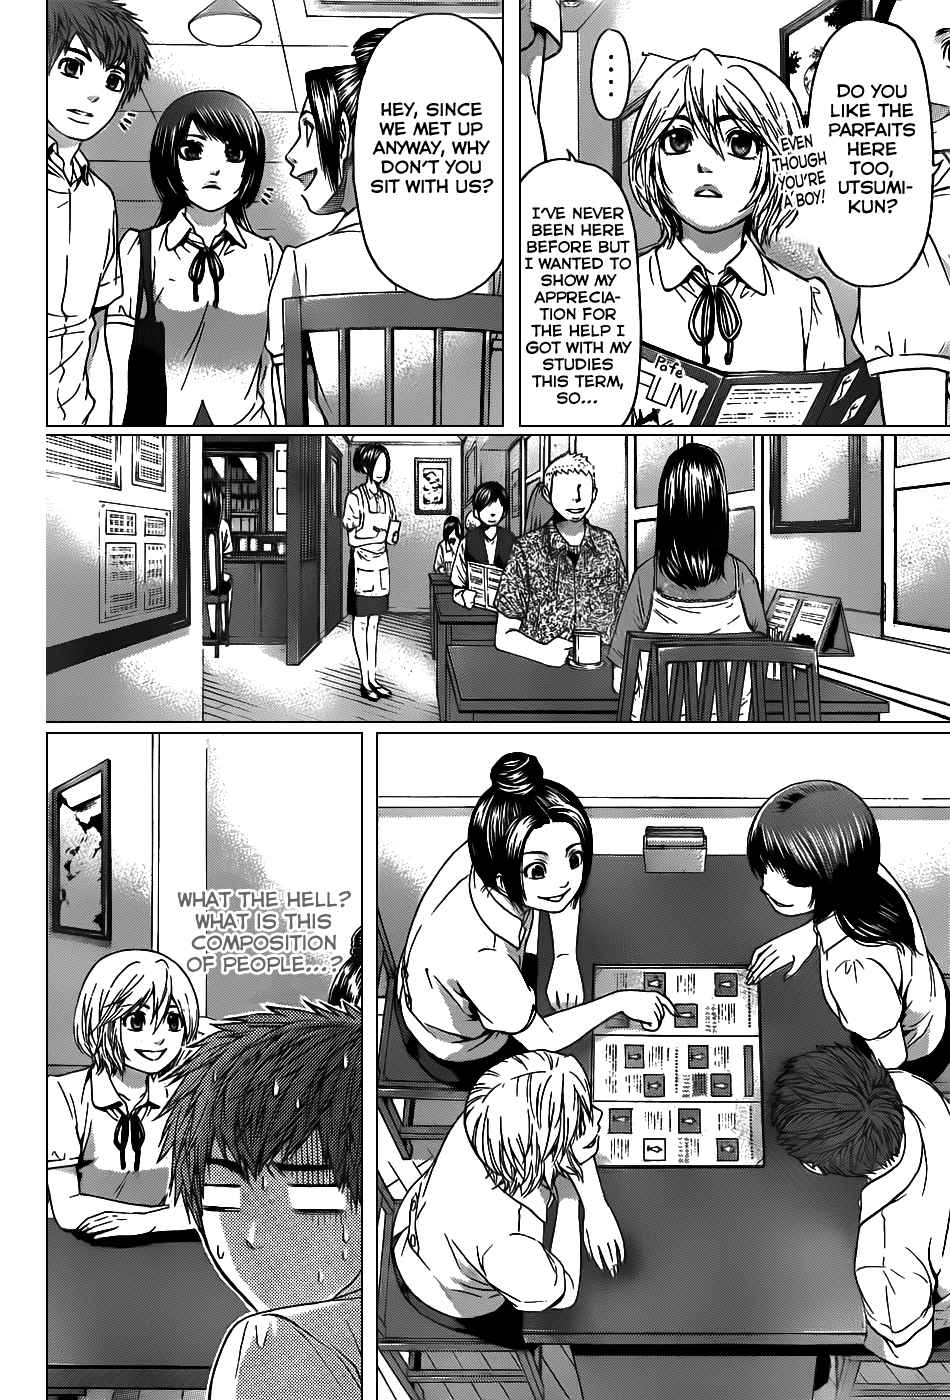 GE ~Good Ending~ Vol. 5 Ch. 42 You're First